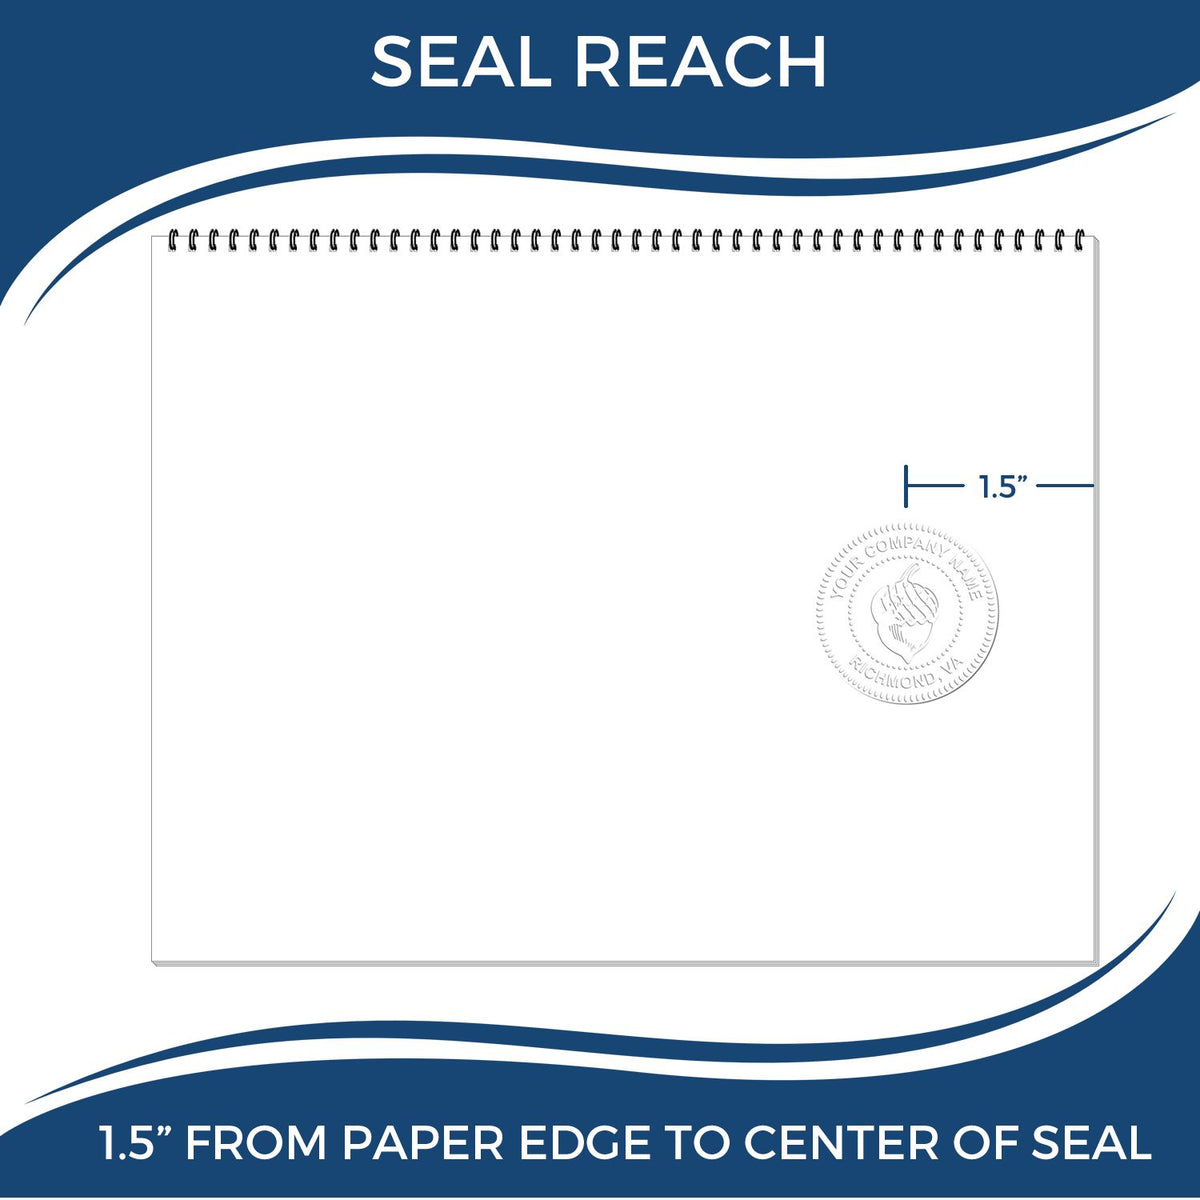 An infographic showing the seal reach which is represented by a ruler and a miniature seal image of the Gift North Dakota Geologist Seal